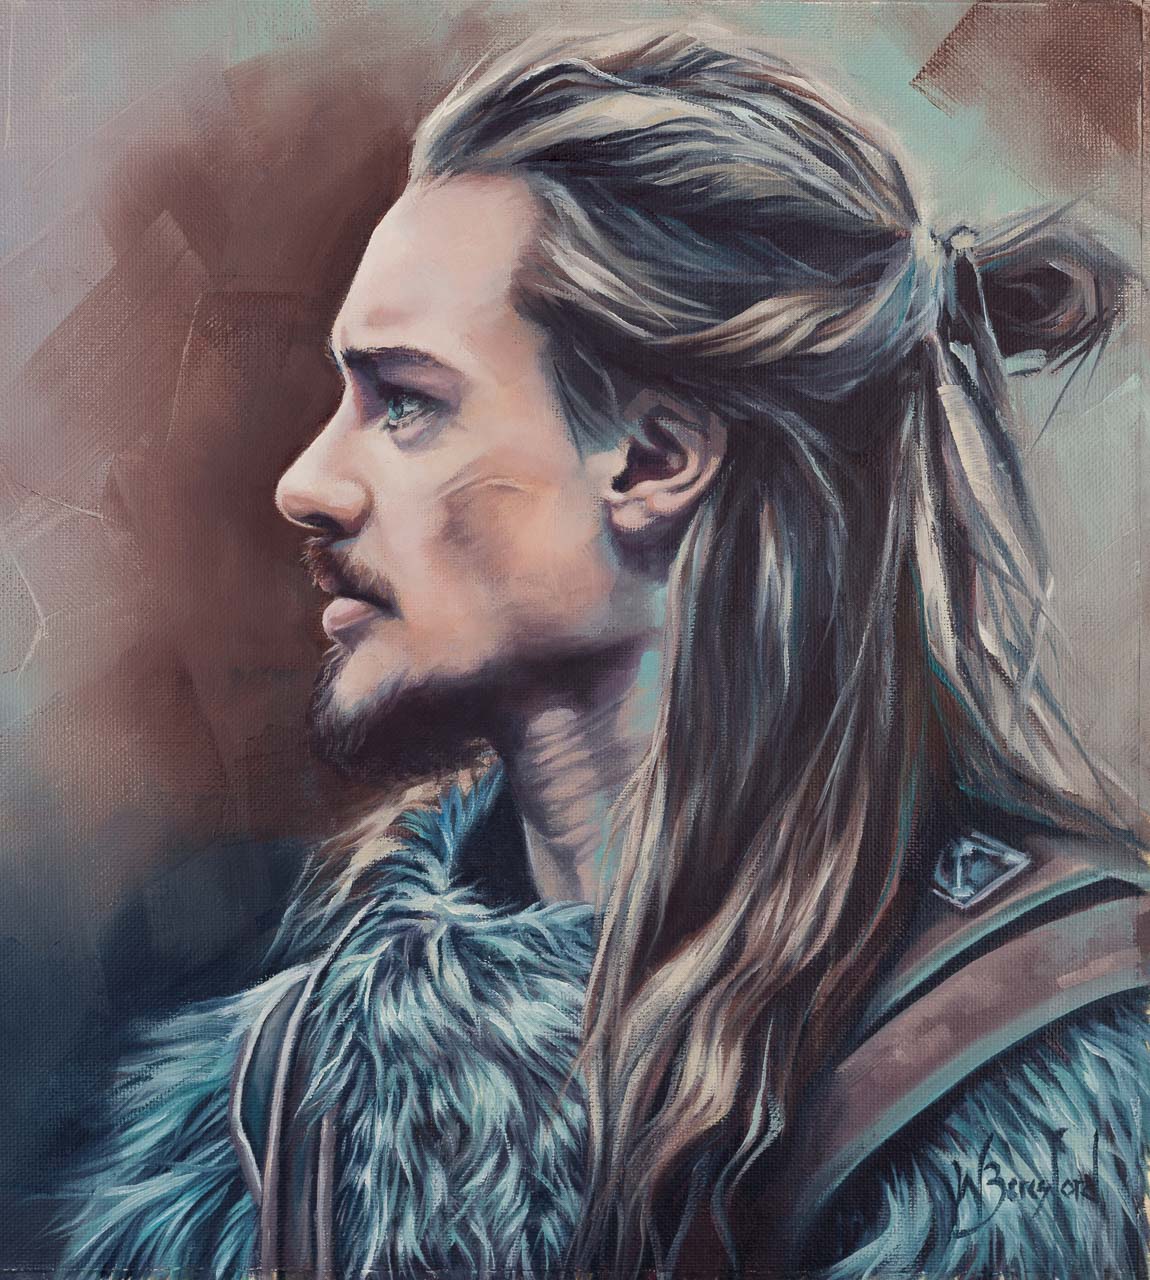 "Uhtred", original oil painting by Wendy Beresford Art